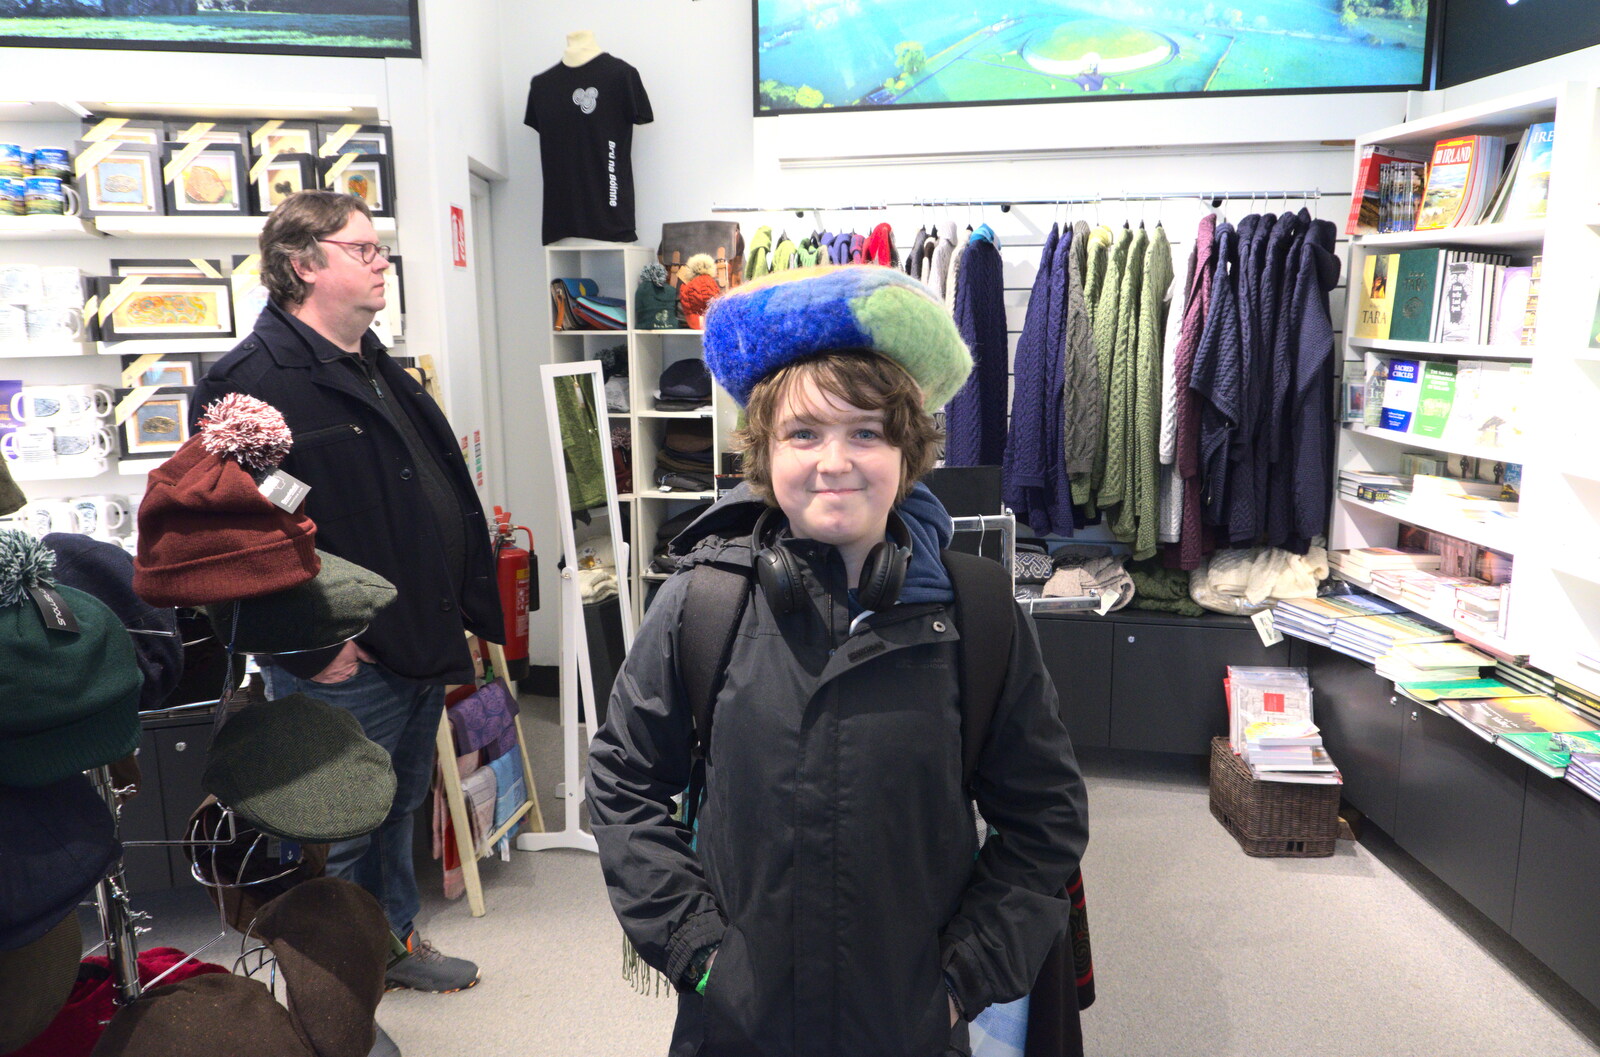 Blackrock North and Newgrange, County Louth, Ireland - 16th February 2023: Fred has a go with a hat